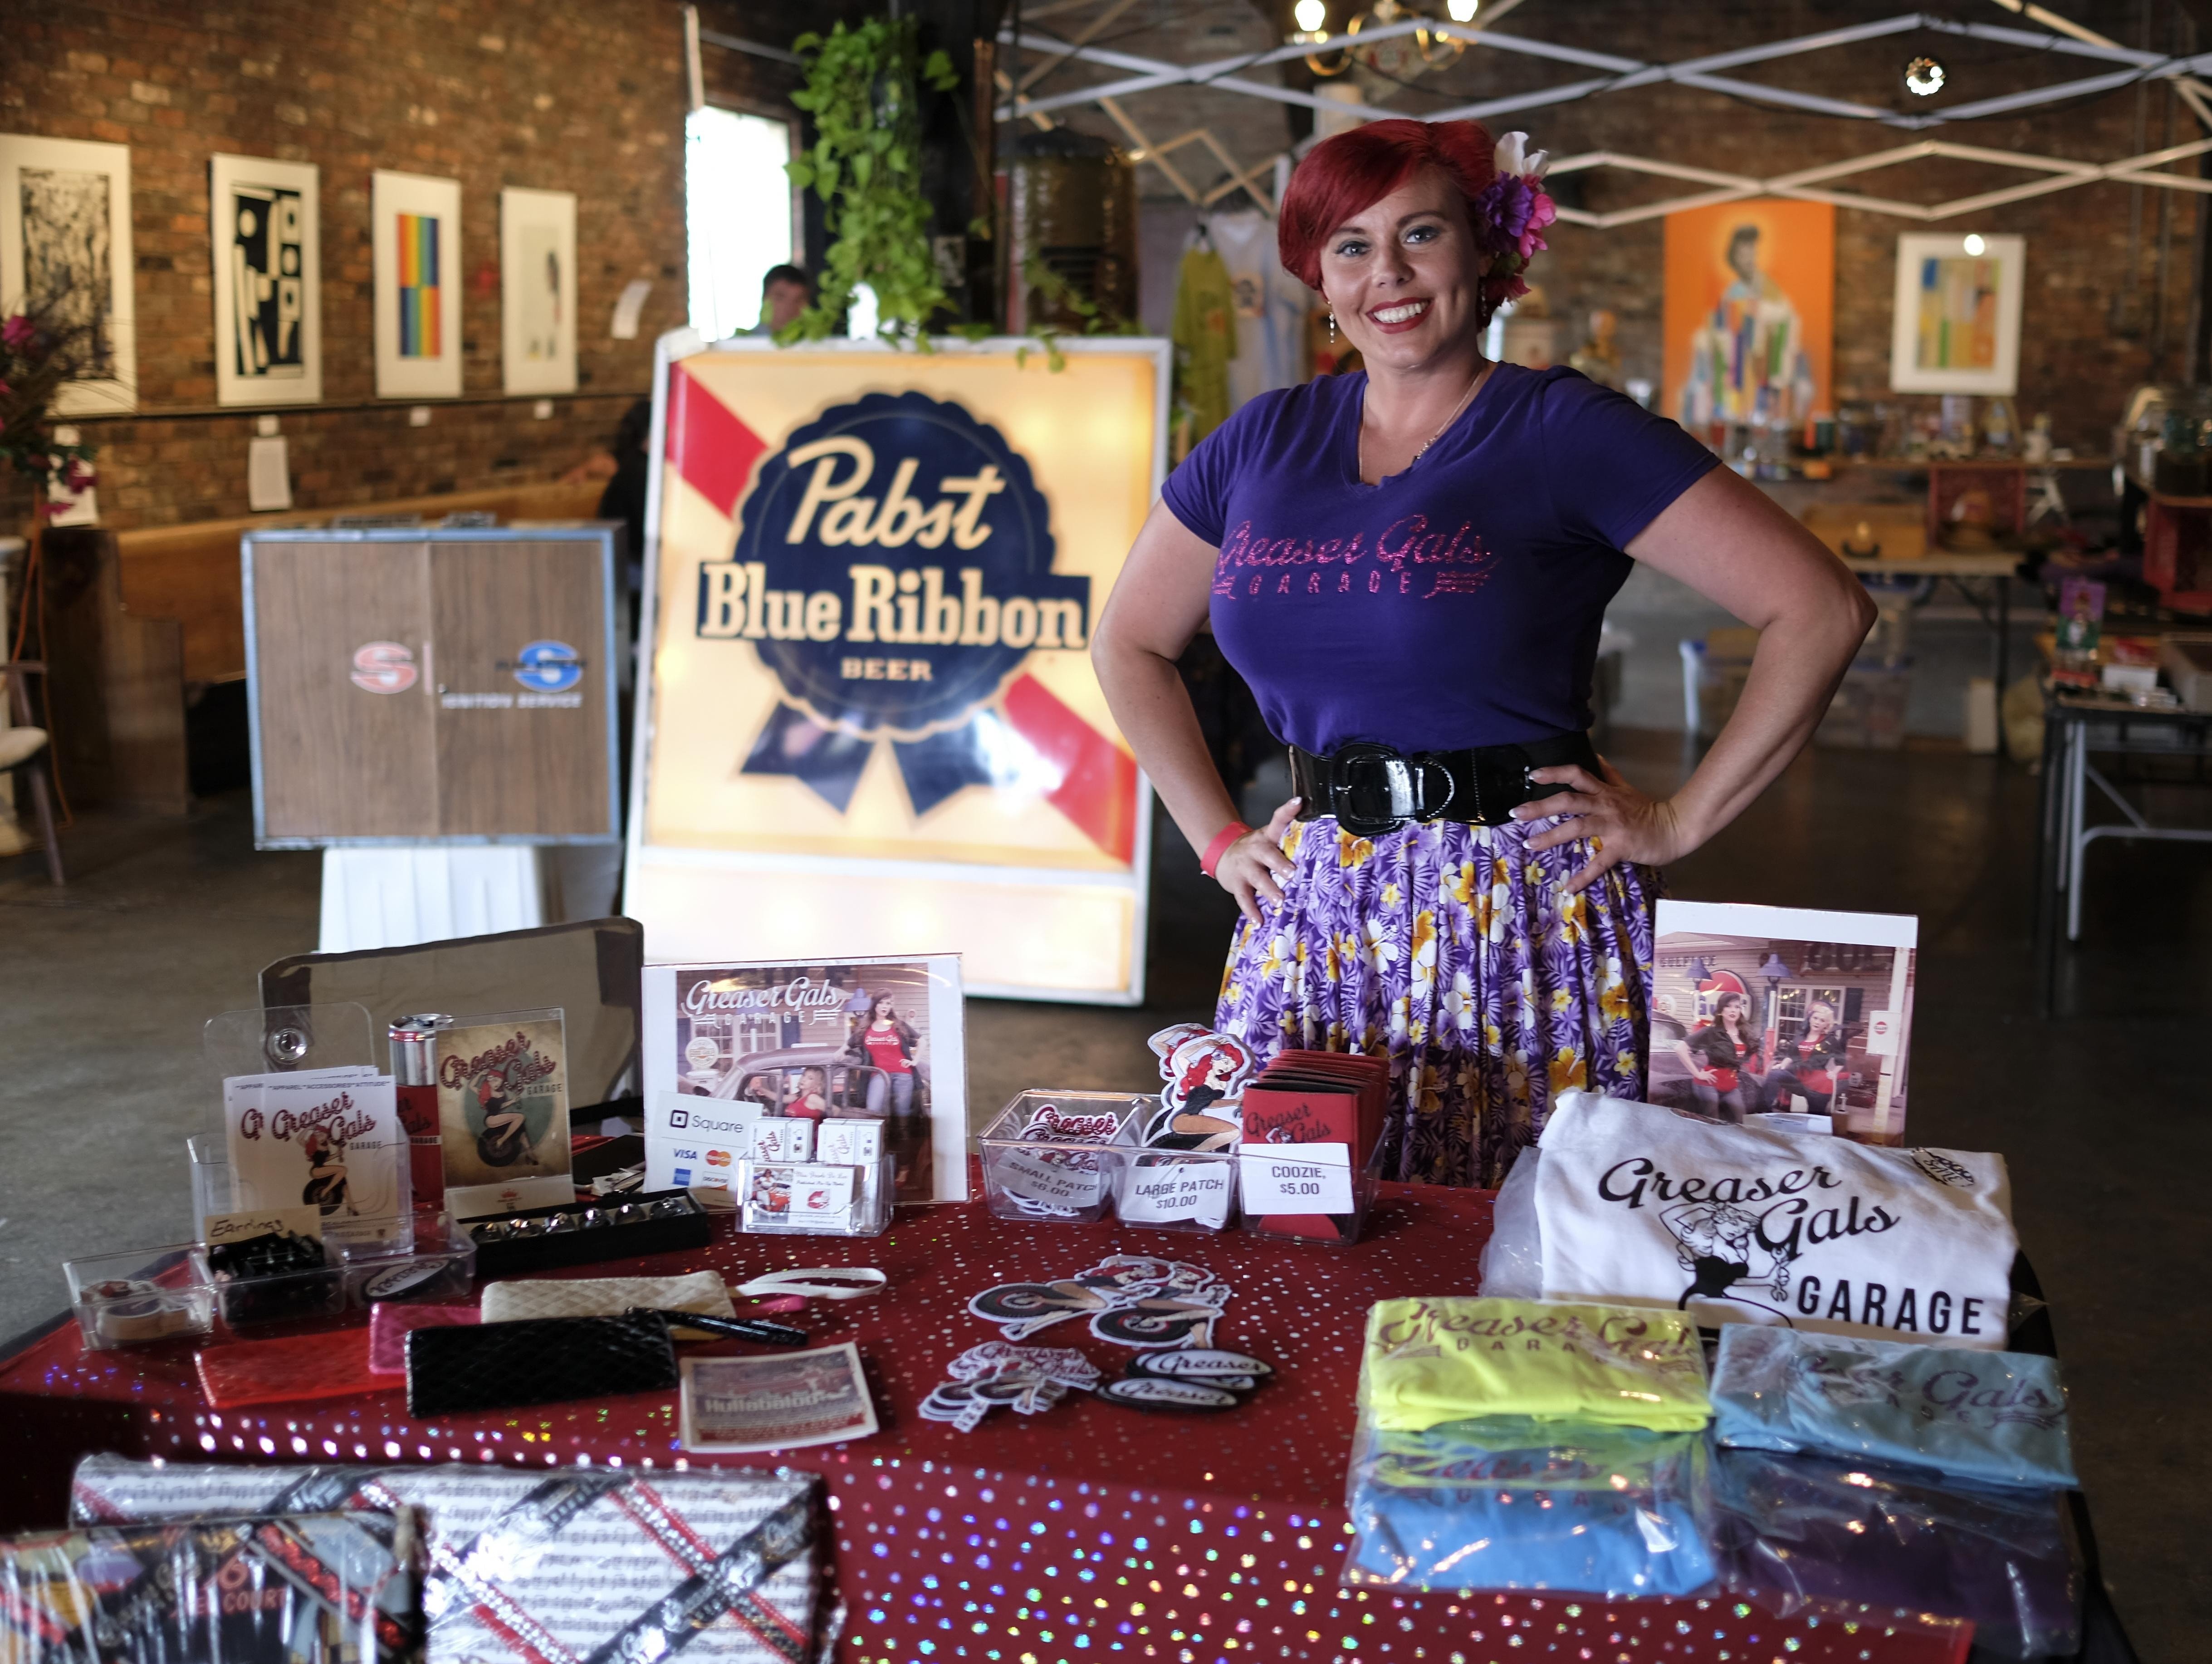 Kimberly Petree aka Pearle De Lux stands by her table for the Greaser Gals Garage where she sells t-shirts and also her hand made jewelry and hair bows. &#147;It&#146;s originally a bunch of us girls that are learning how to work on our own cars. I&#146;ve got a 1953 Chevy Bel Air I work on, and my business partner has a 69 Chevelle.  I have some other friends that have newer Jeeps and Camaros, and we just kind of have our own thing&#133; It&#146;s almost like a social club, and we like to go to the different events and travel around to look at cars.&#148;